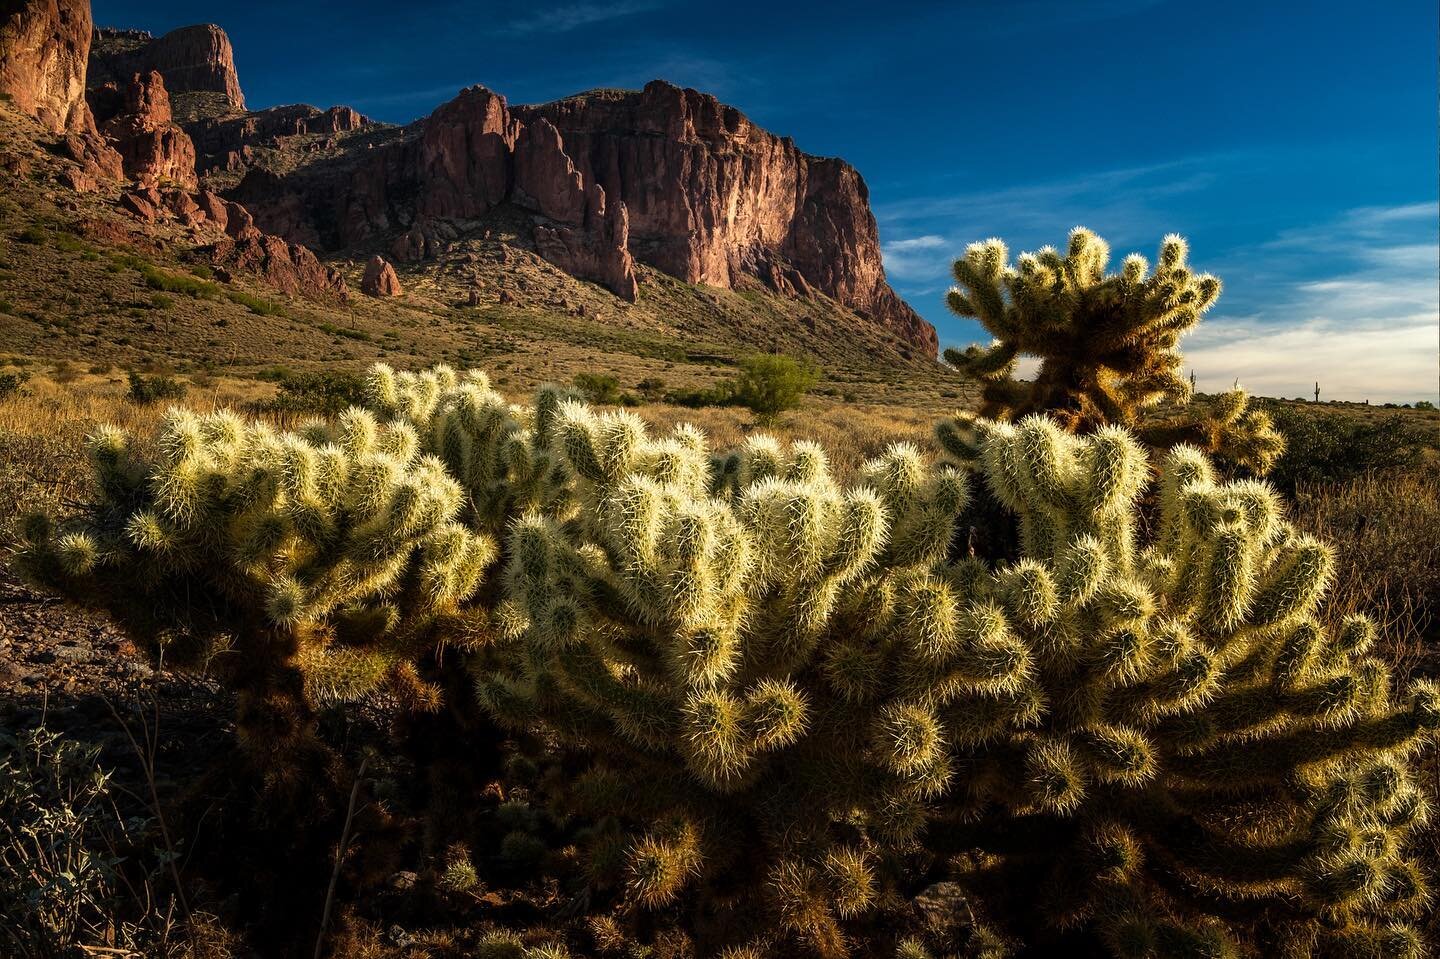 &ldquo;In the Moment

Superstition Mountains at sunset. 

📸 Fujifilm XT-3, XF10-24mm f4 R OIS WR, 24mm

@raw_landscape @raw_potd raw_world  @raw_edit @raw_community #Landscape #Outdoors #Nature #ScenicsNature #arizona #superstitionmountains #arizona